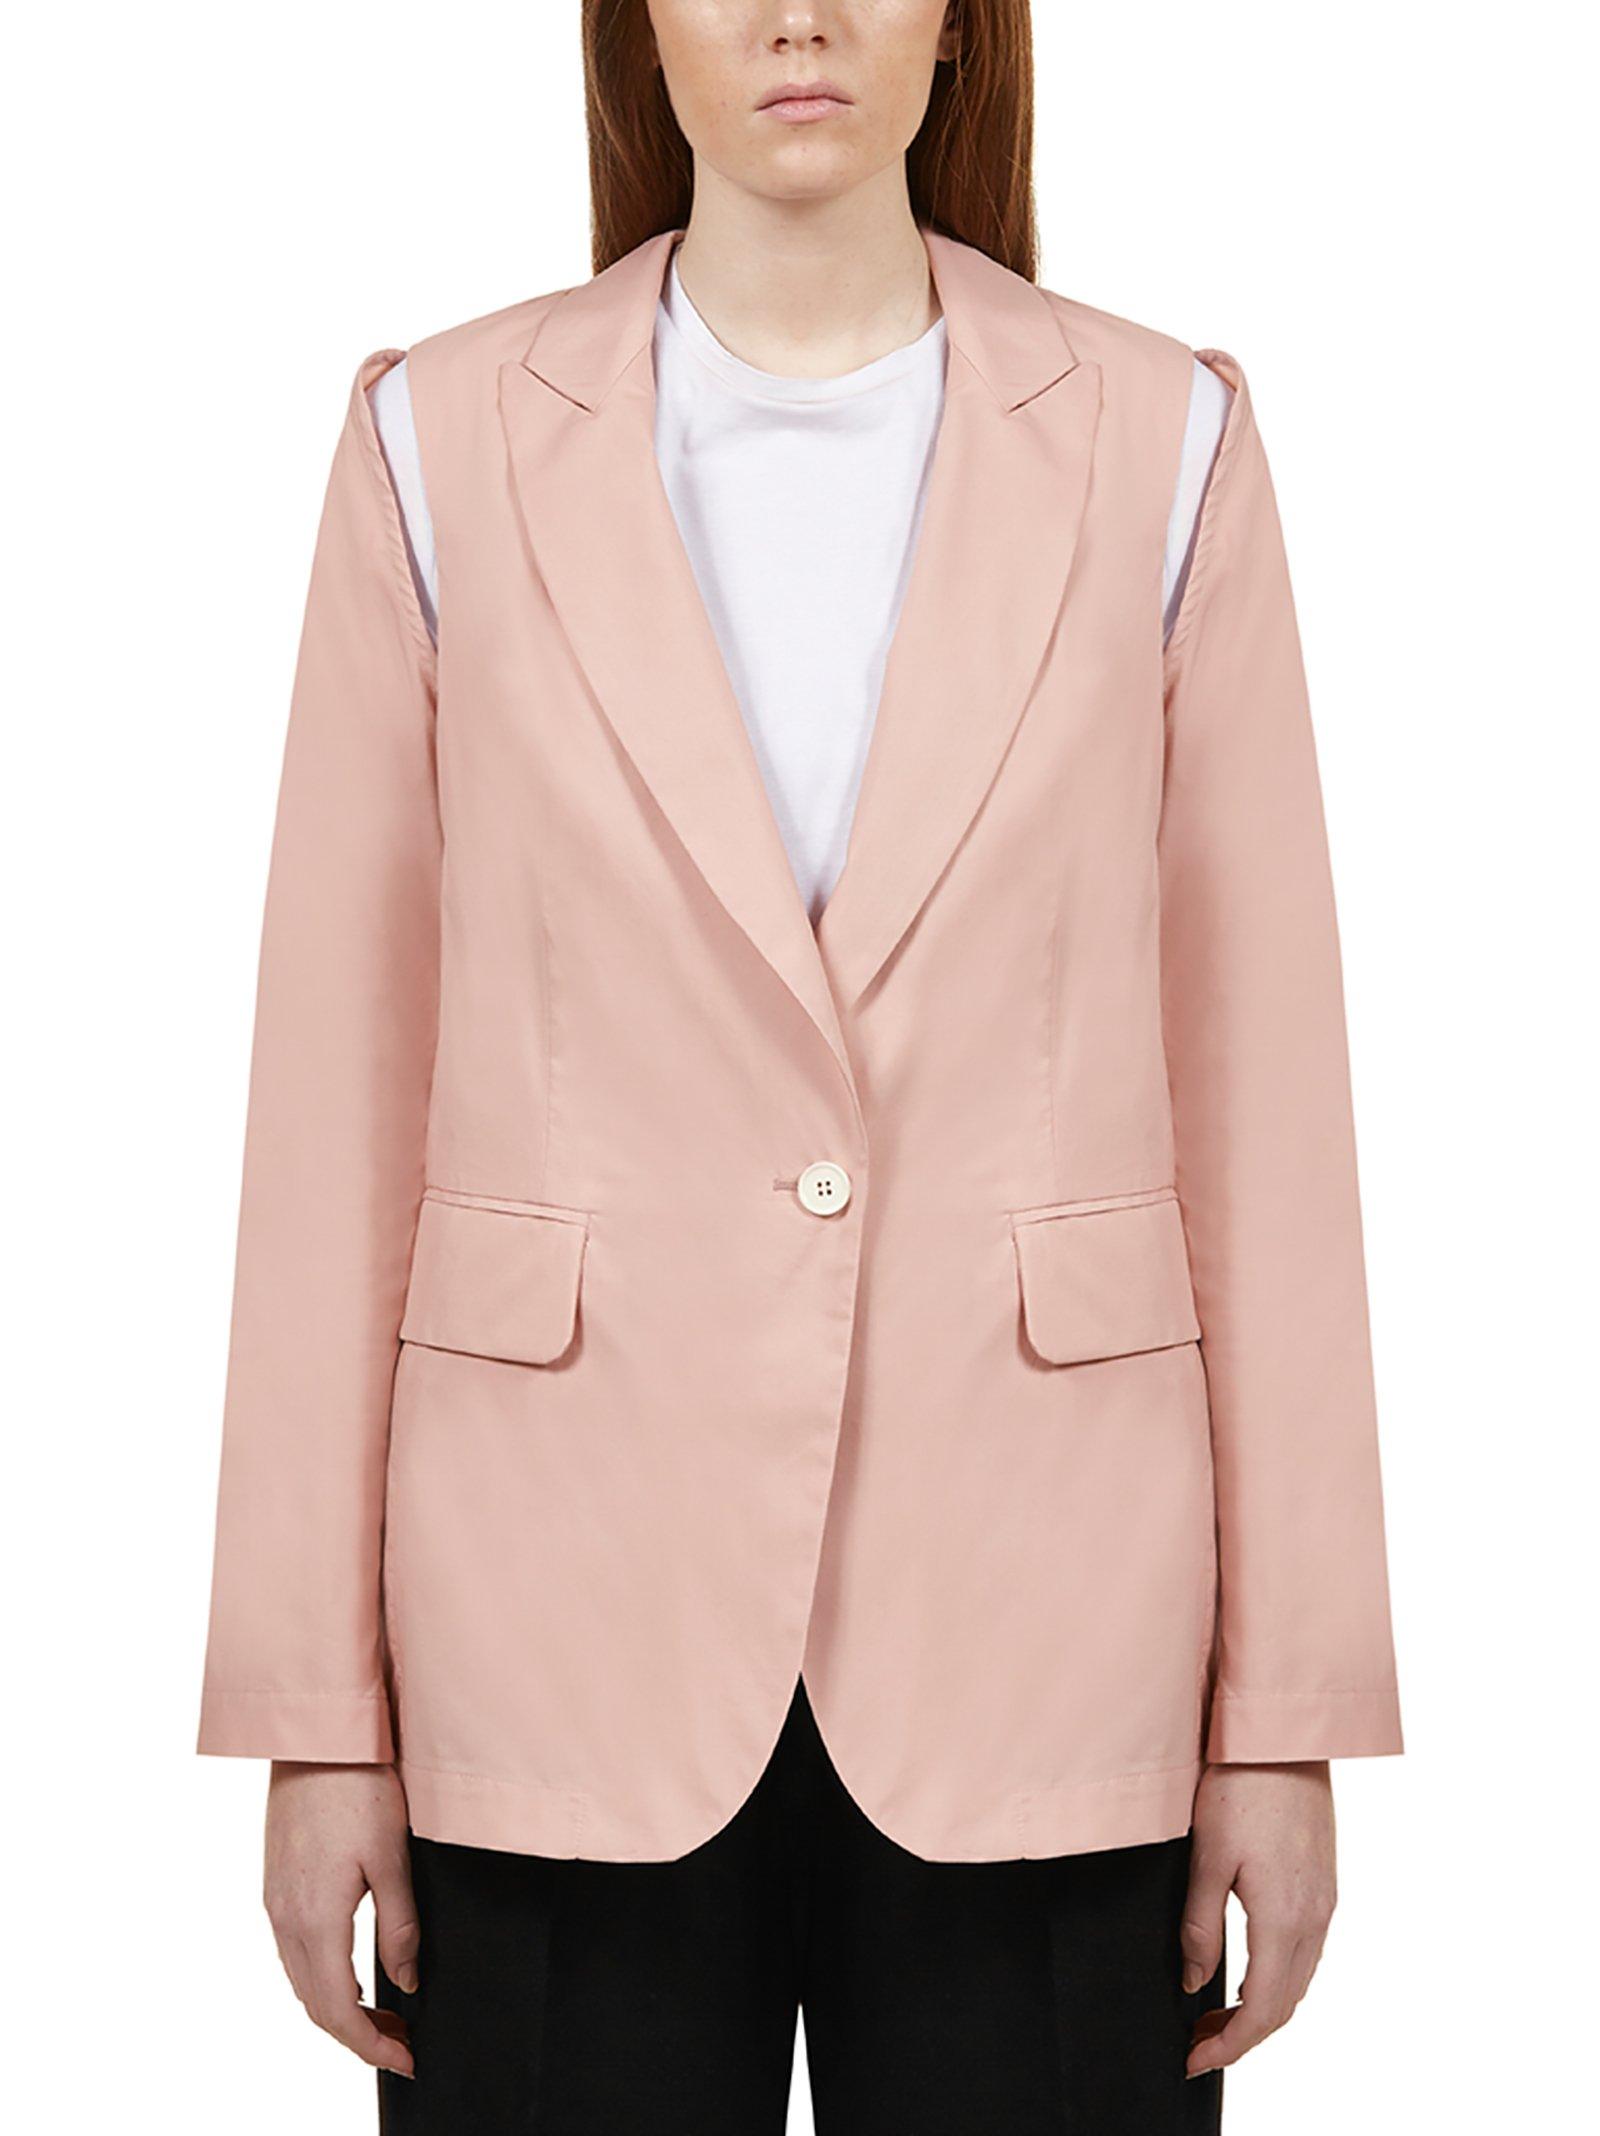 MM6 by Maison Martin Margiela Synthetic Cut-out Blazer in Pink - Lyst